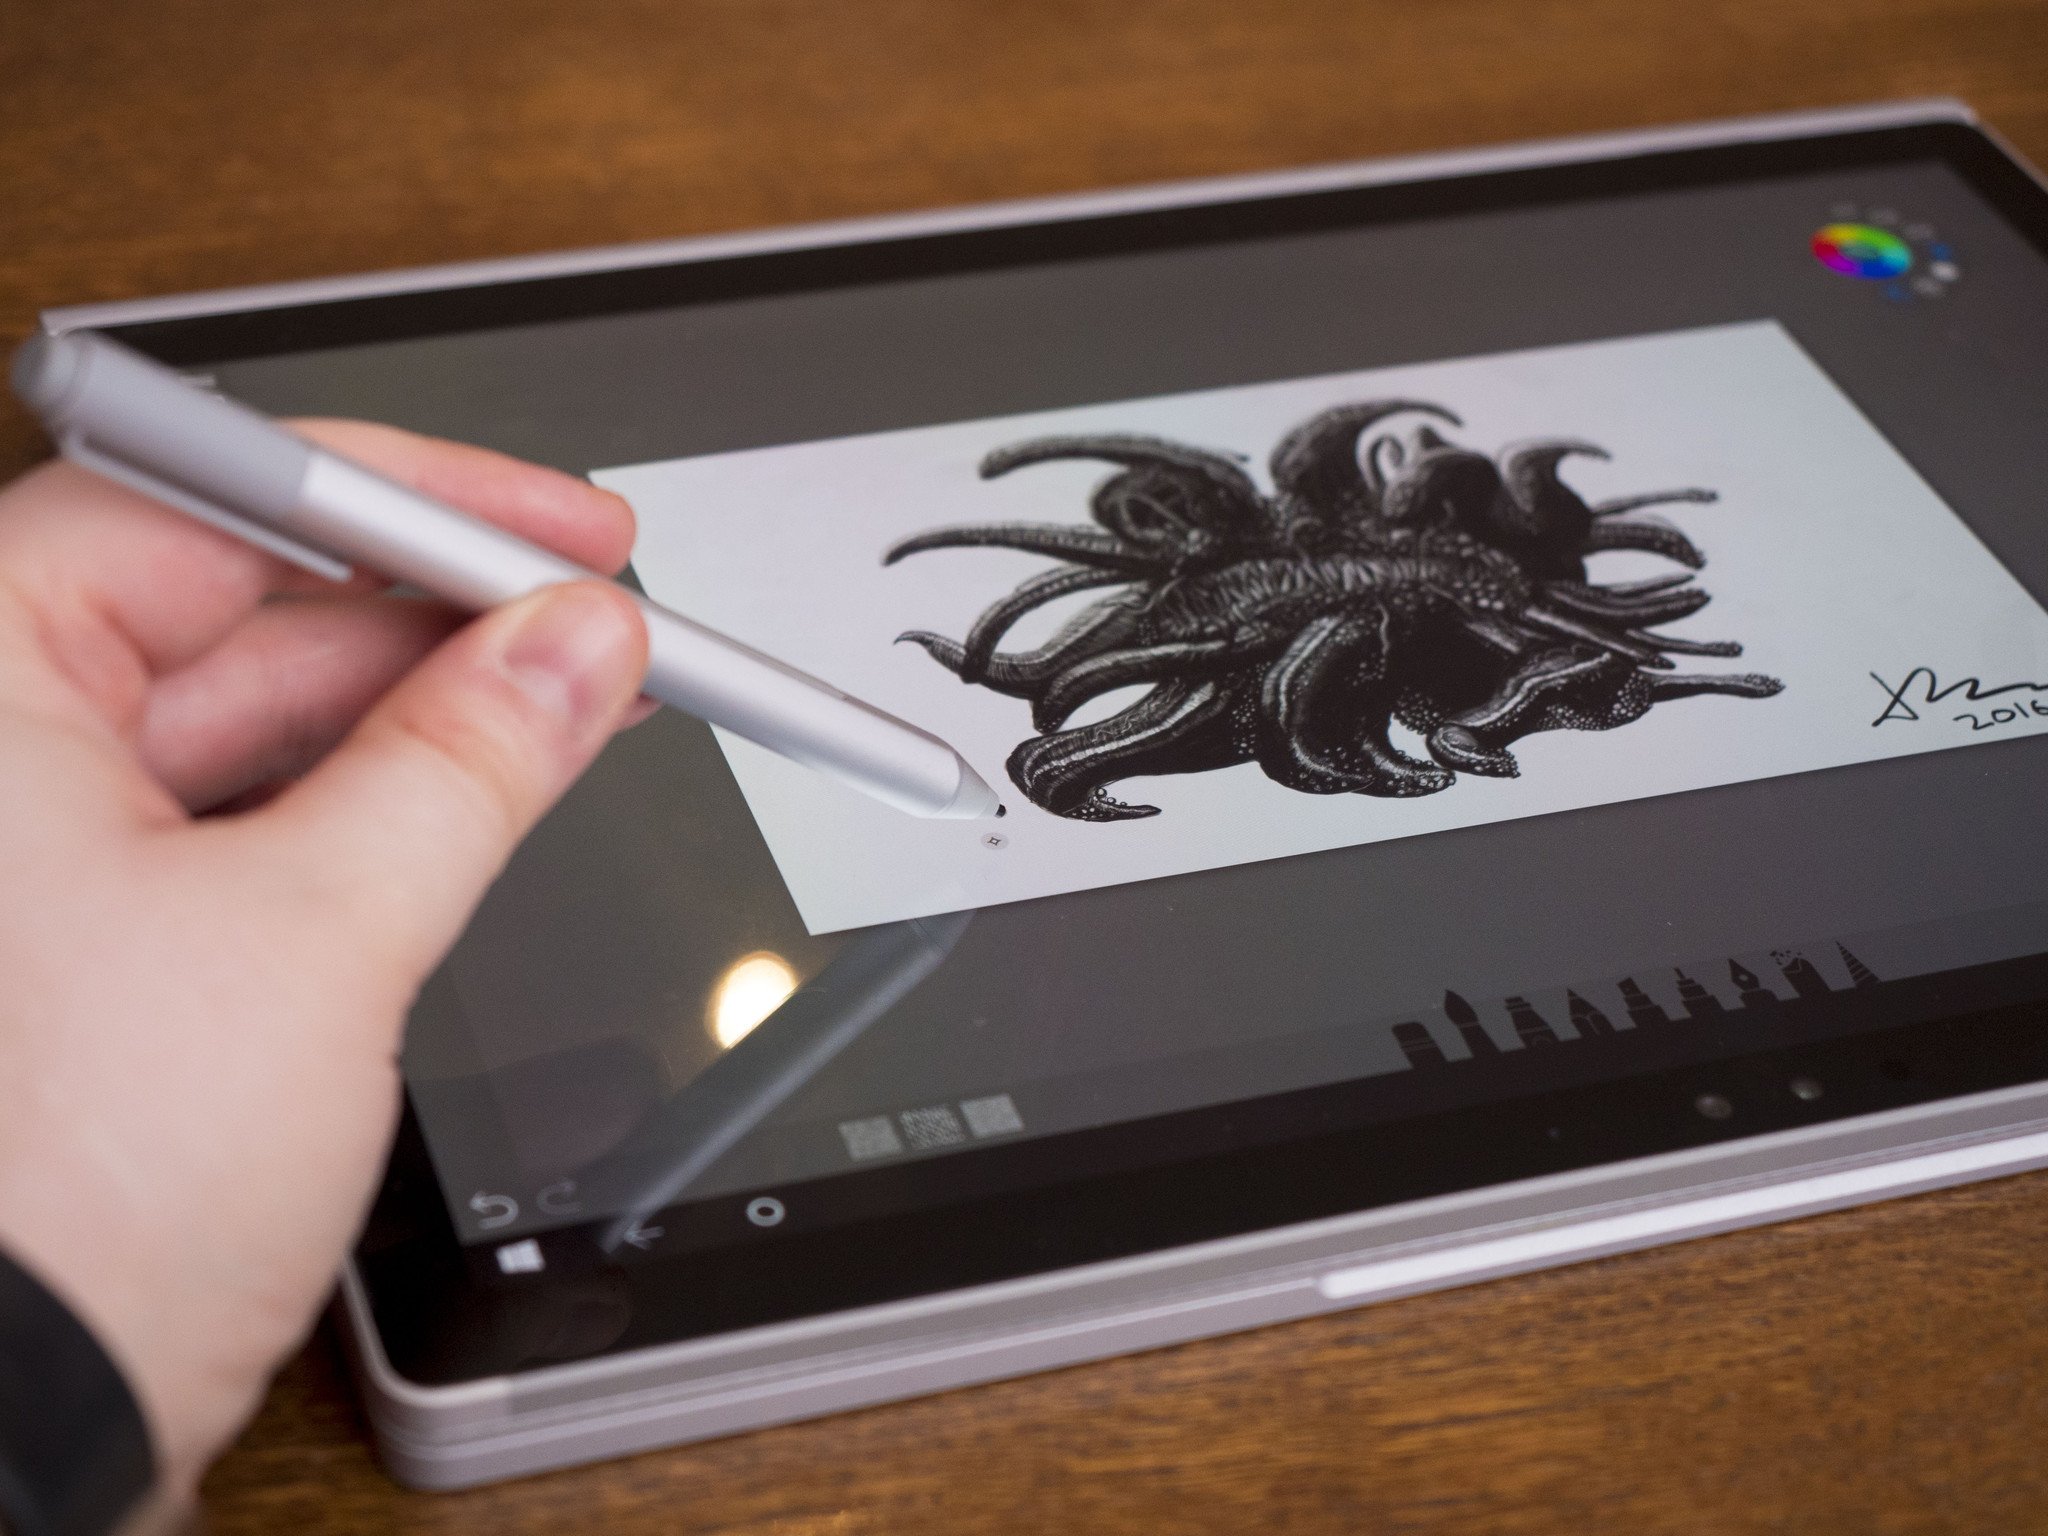 Sketchable review drawing on the Surface Book a